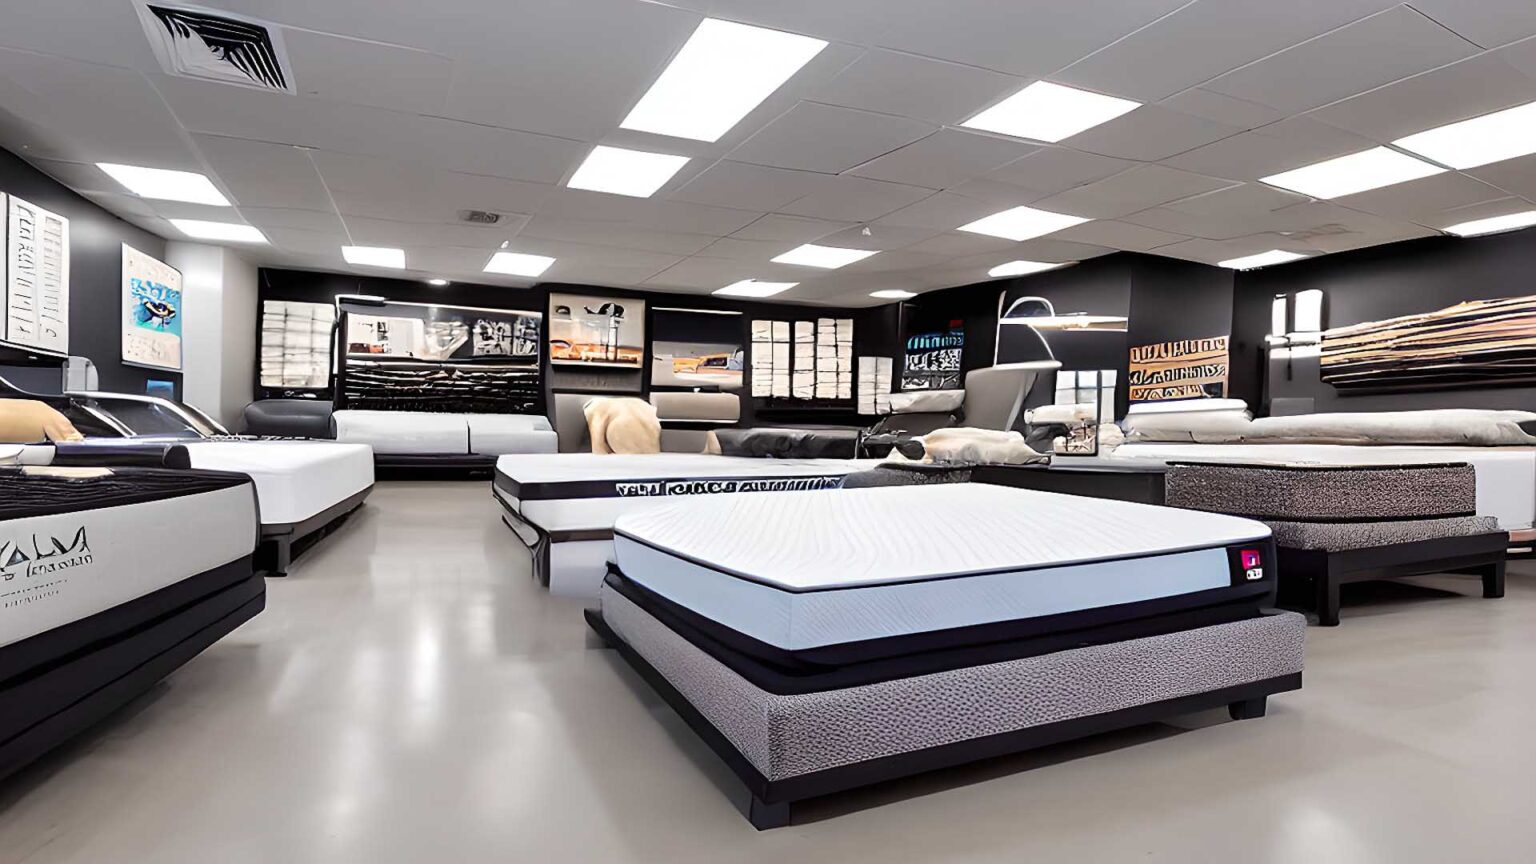 Mattress Stores, mattress dealers, and mattress retailers near me in Lakewood, OH